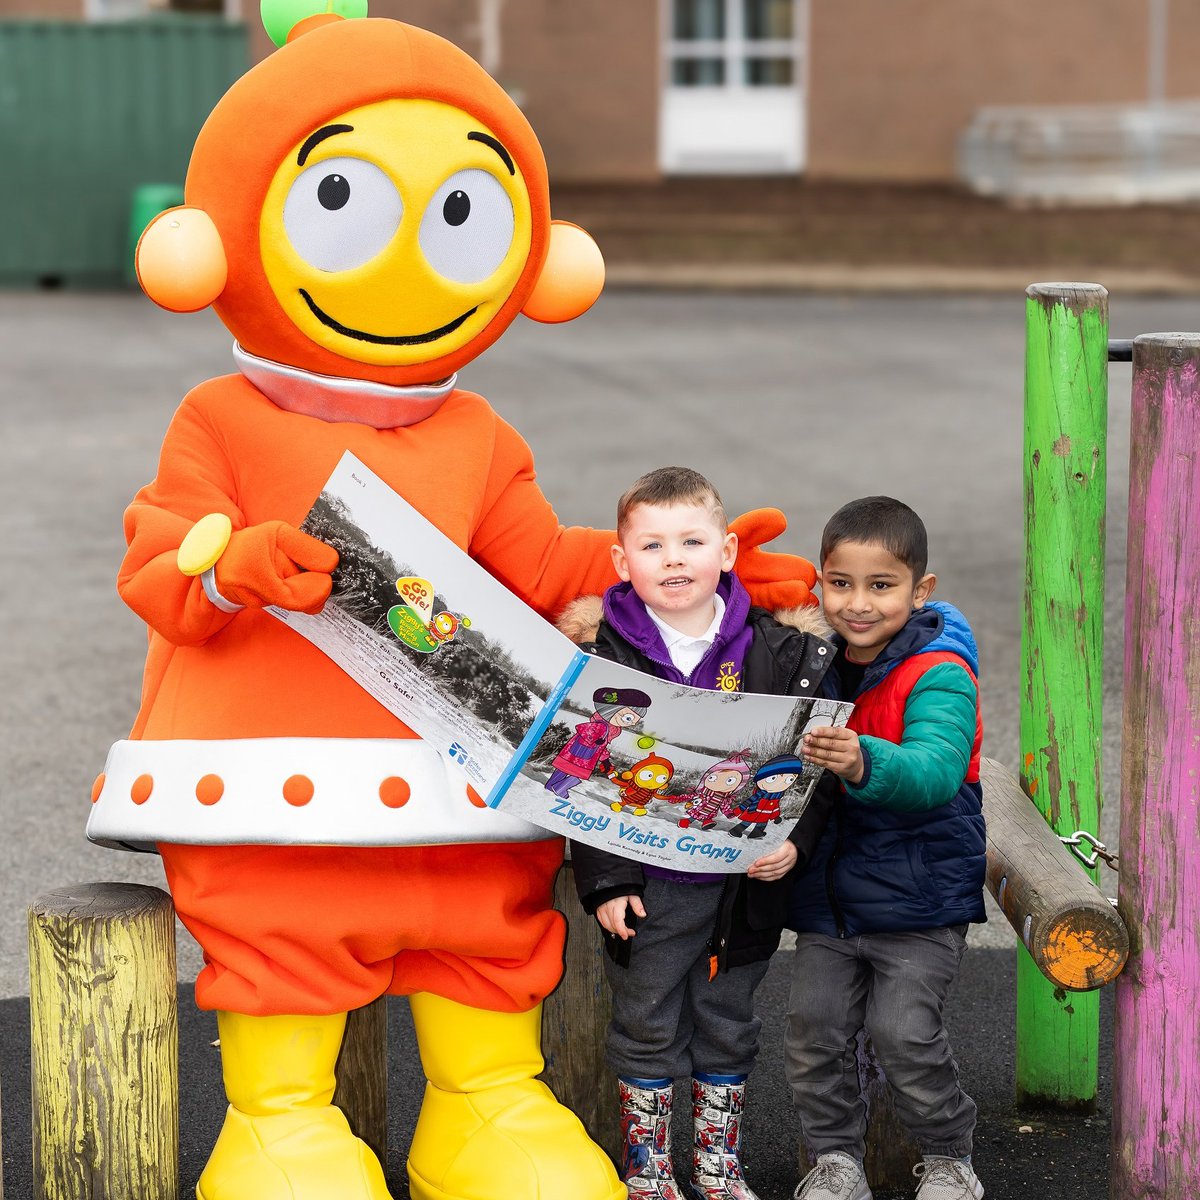 Ziggy had a great time visiting @SchoolDyce to join in with some playtime fun and remind children to stay safe on our roads. 🚦 Learn more about Ziggy and the free resources available at 👉 roadsafety.scot/ziggy-online #GoSafeWithZiggy